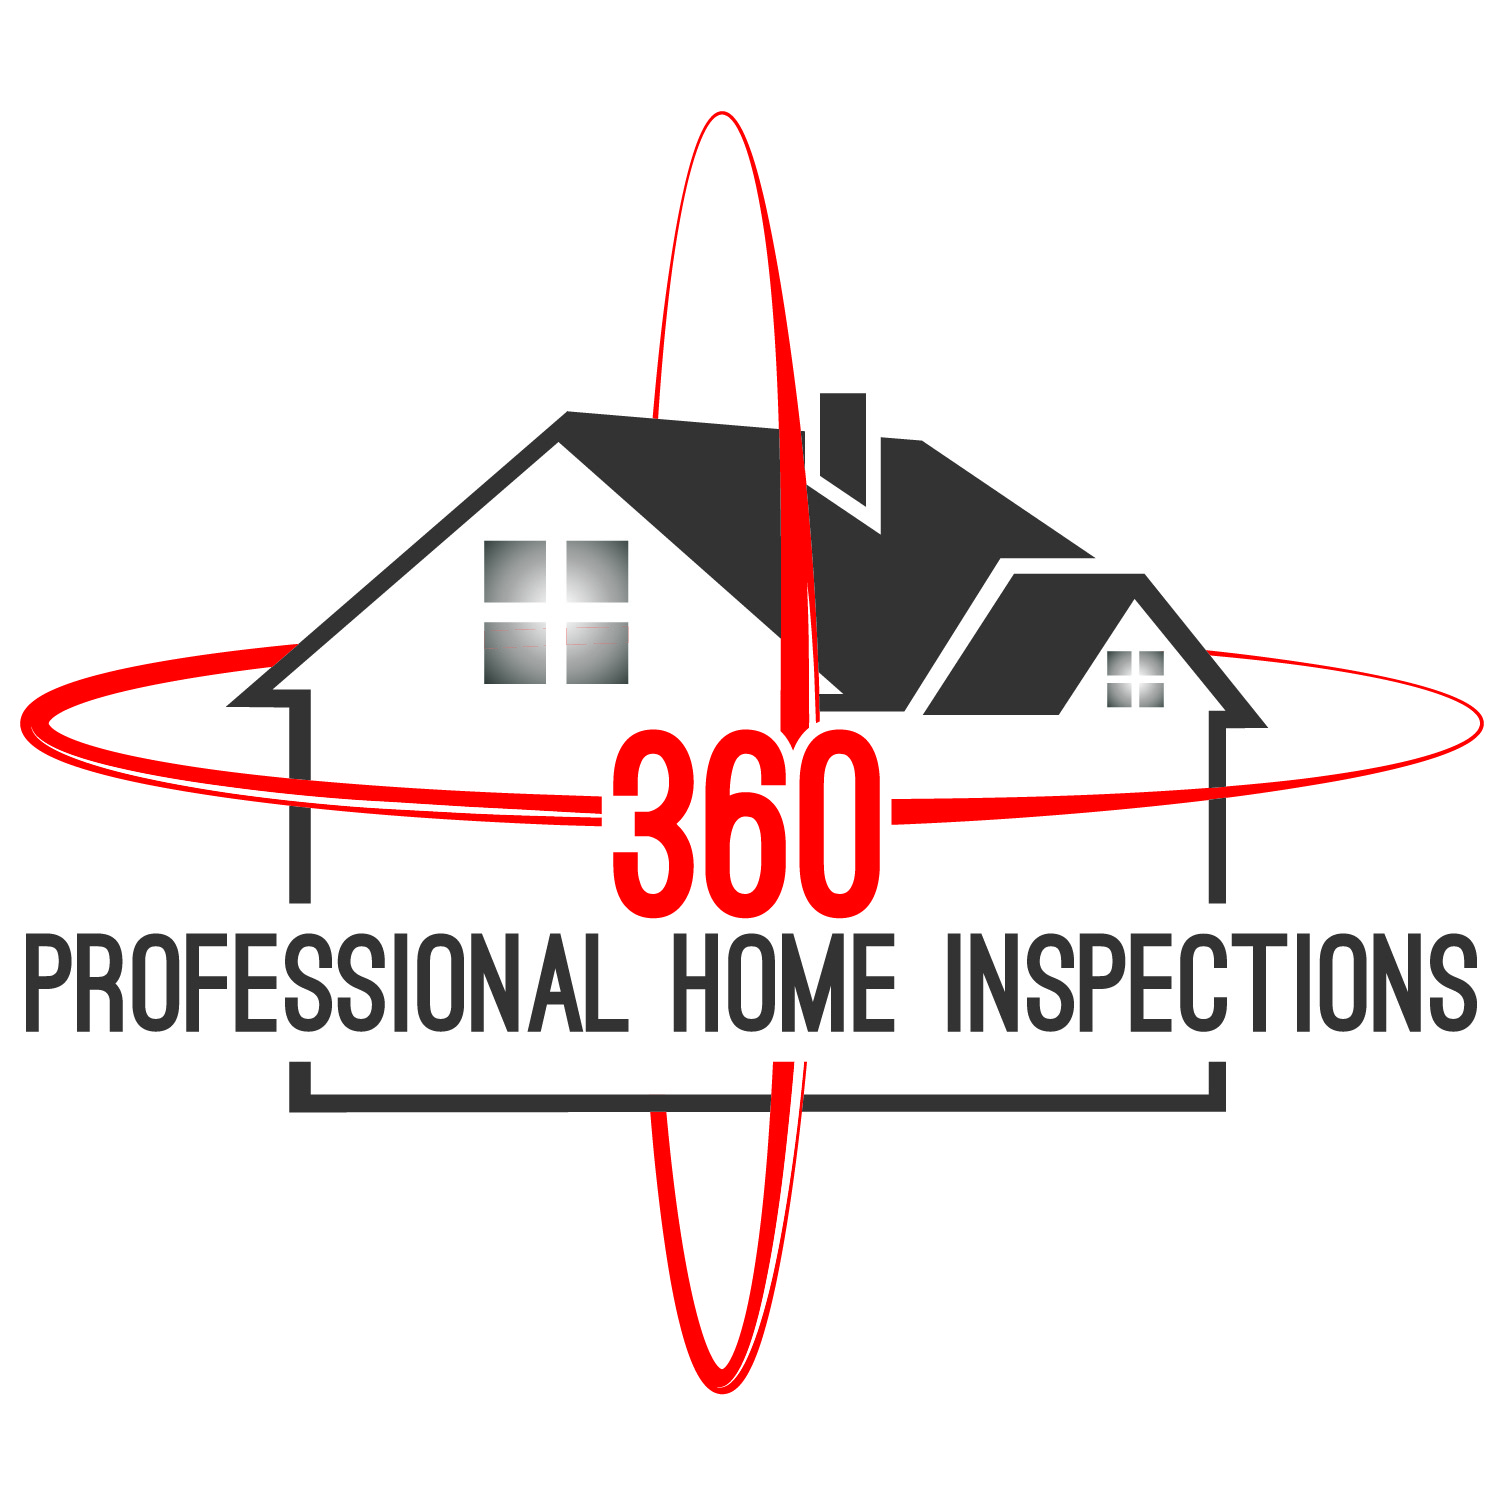 360 Professional Home Inspections, LLC